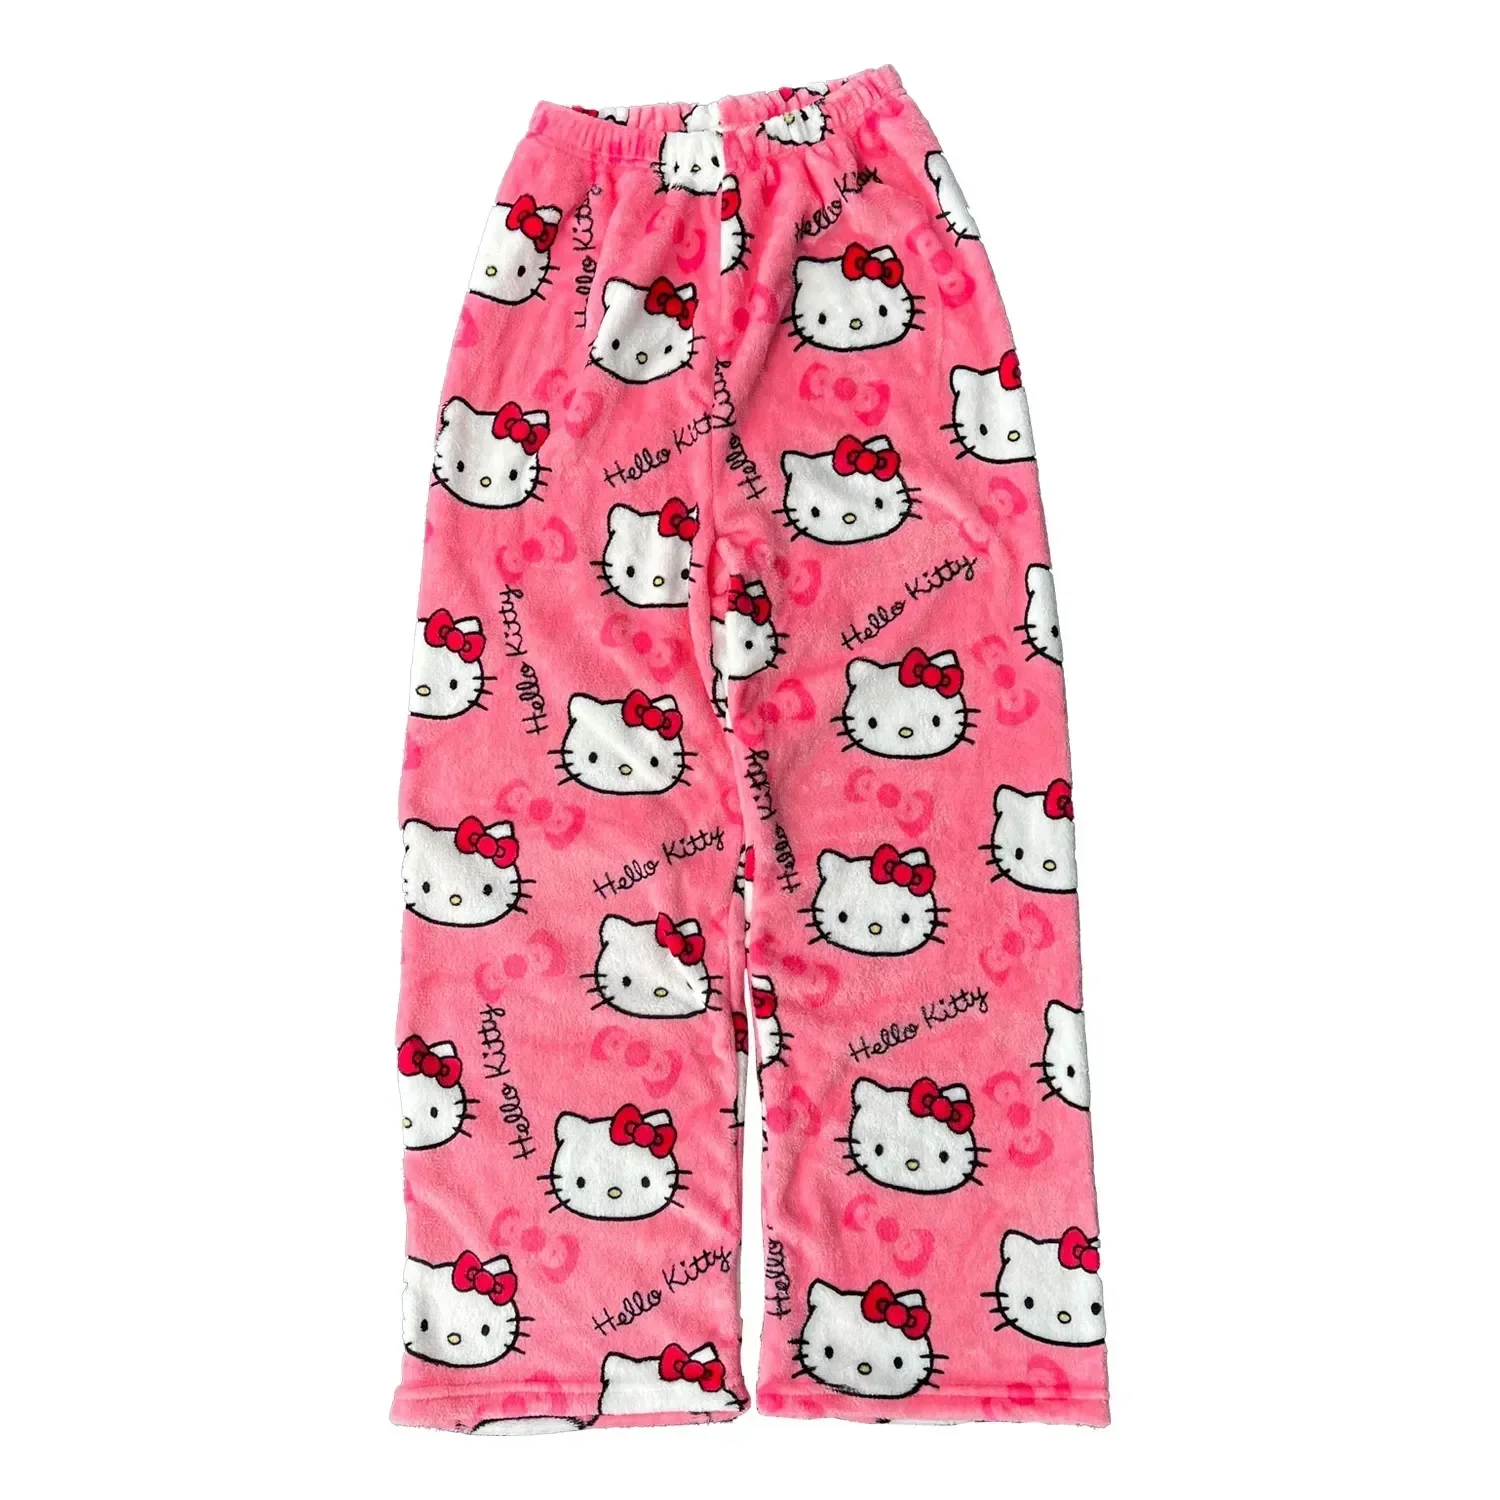 Hello Kitty Pajamas for Maternity: Comfortable Sleepwear for Expecting Mothers插图